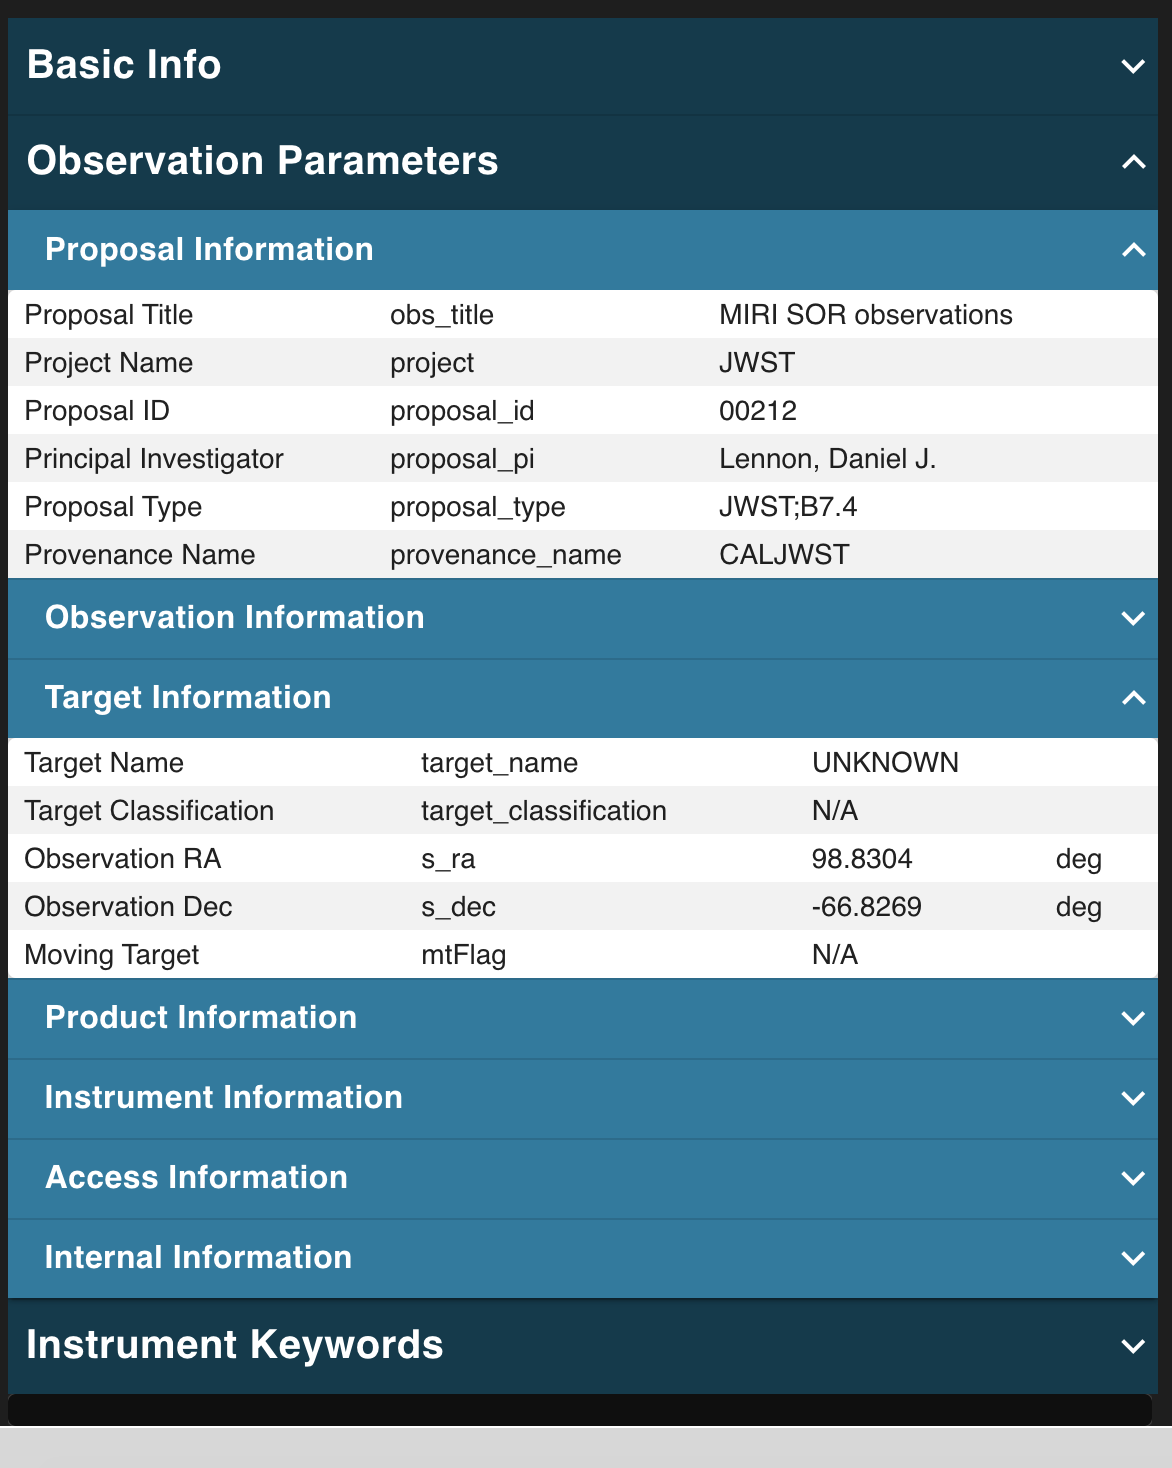 Observation Parameters group - showing the Proposal, Observation, Target, Product, Instrument, Access, and Internal info sub-panels